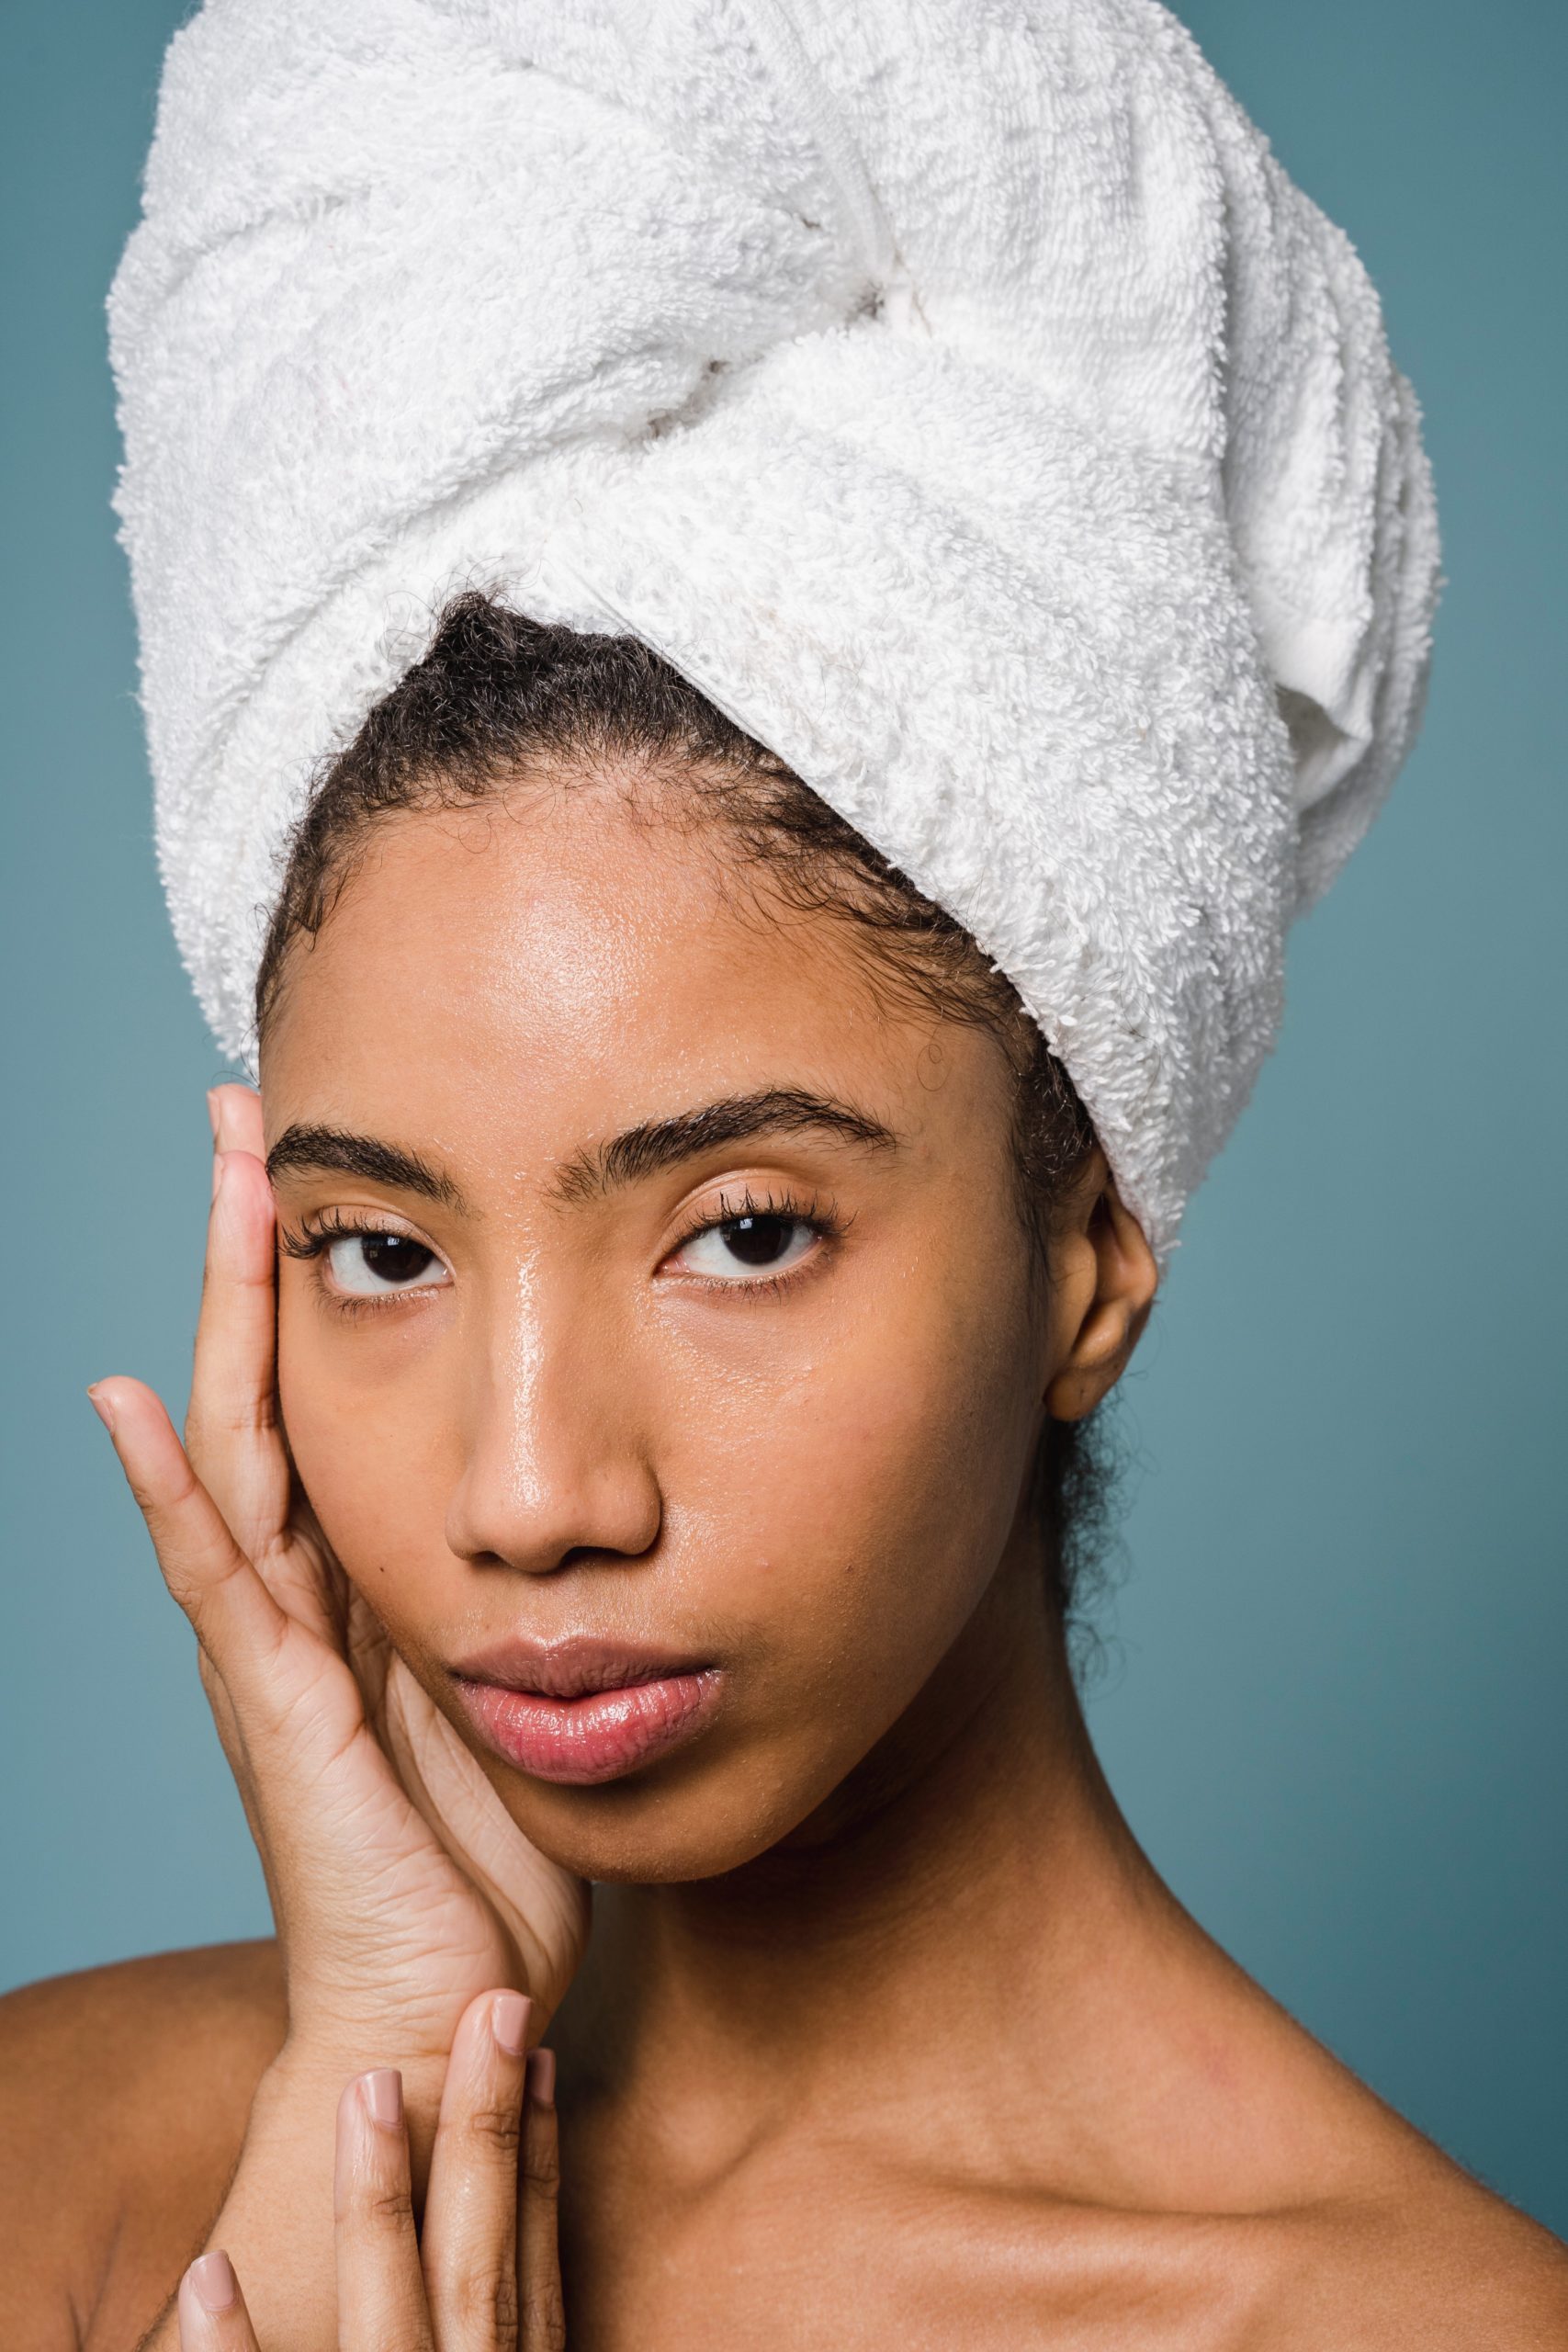 How to transition to a clean skincare routine and clean skincare products #CleanSkincare #NonToxicSkincare #NonToxicBeauty #TheDimpleLife #CleanLiving